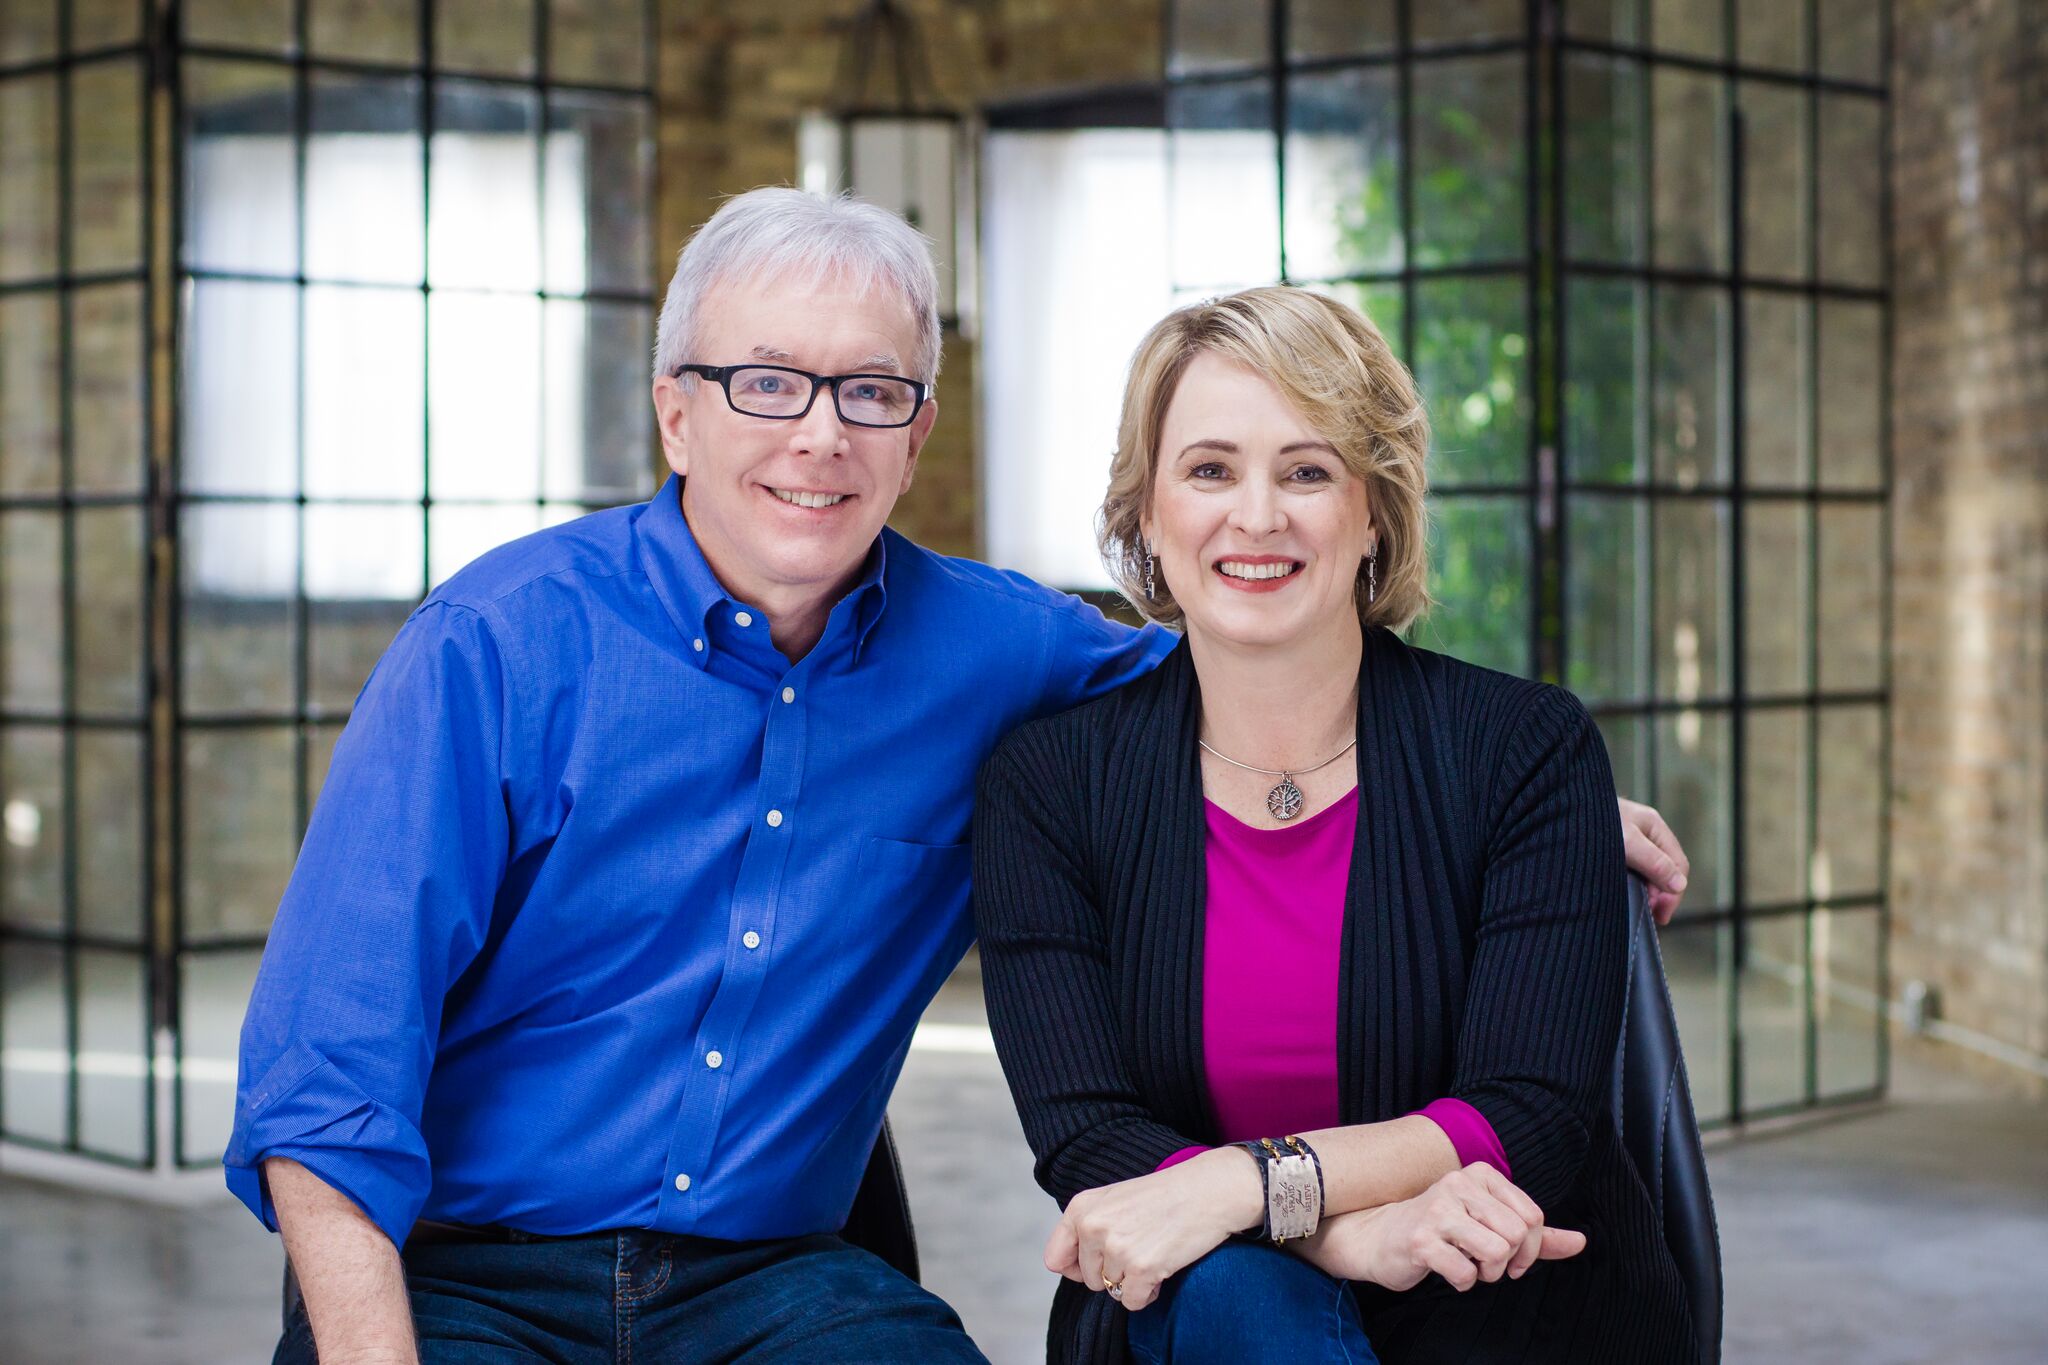 Zoom Call with Jeff & Shaunti Feldhahn  We are very excited for Jeff and  Shauni Feldhahn to join us on February 19–21 for our Thriving in Marriage  conference! Check out this